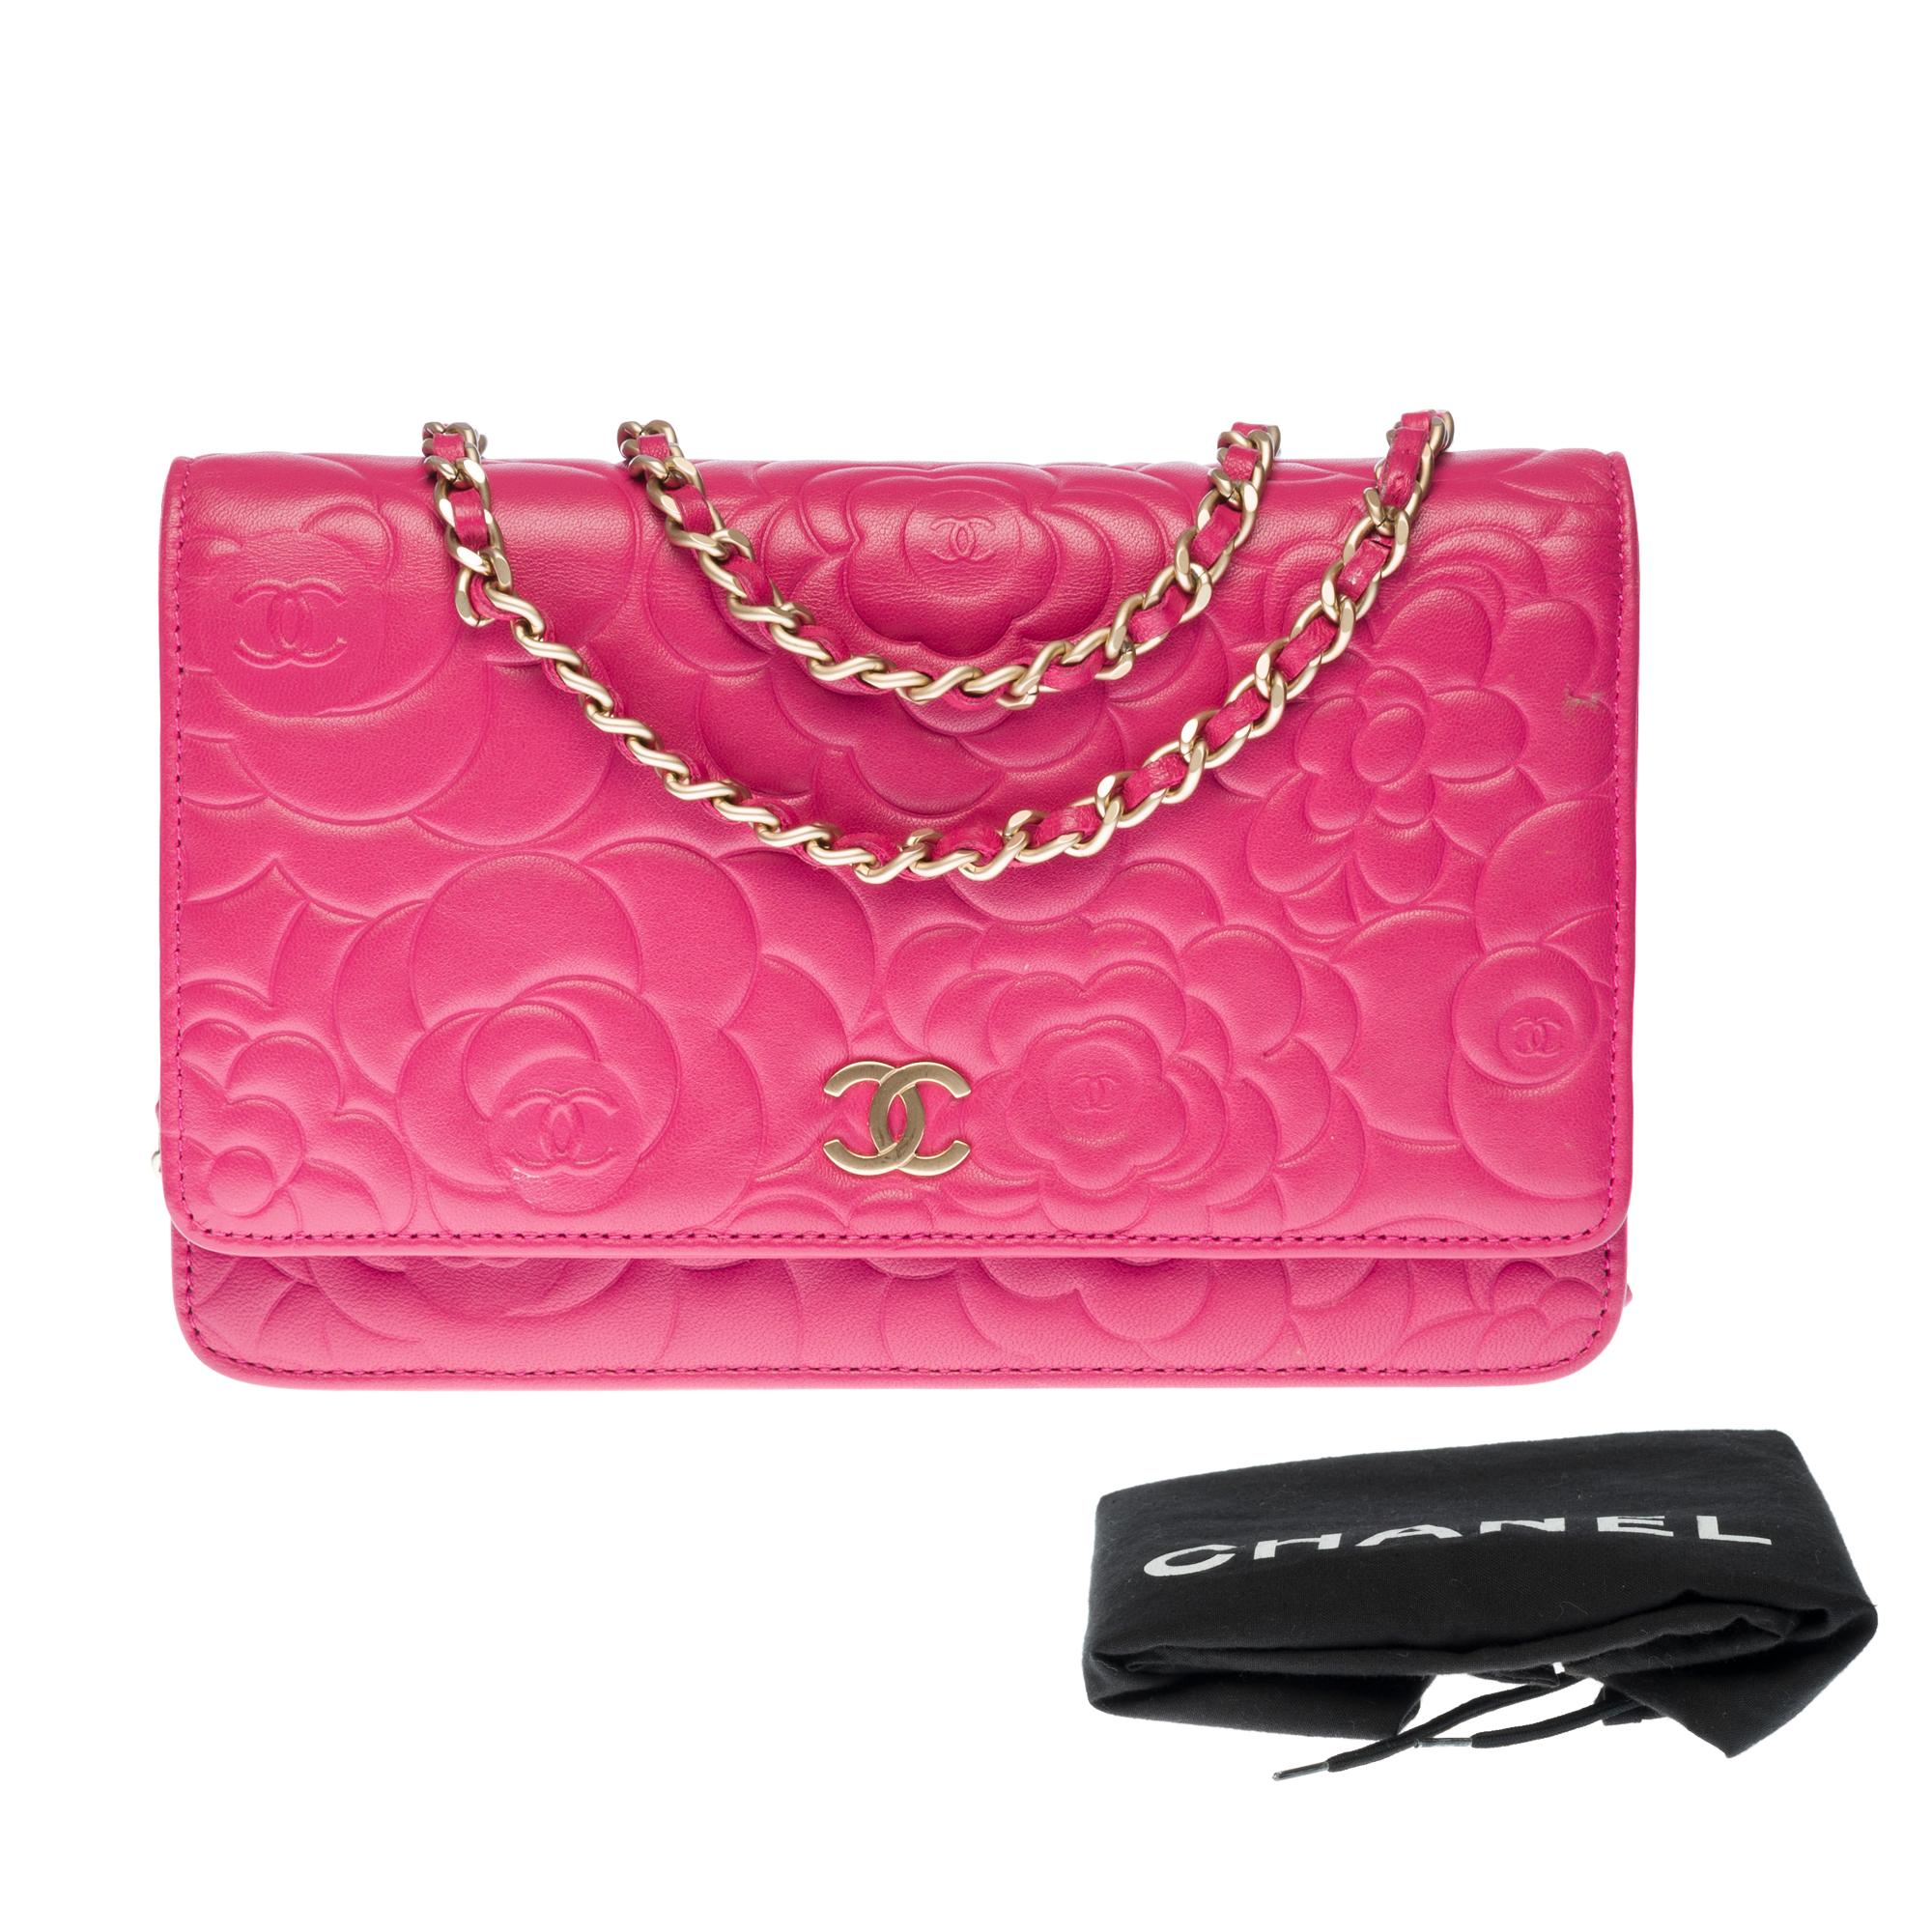 Chanel Wallet on Chain (WOC) Camelia shoulder bag in pink quilted leather, GHW 3